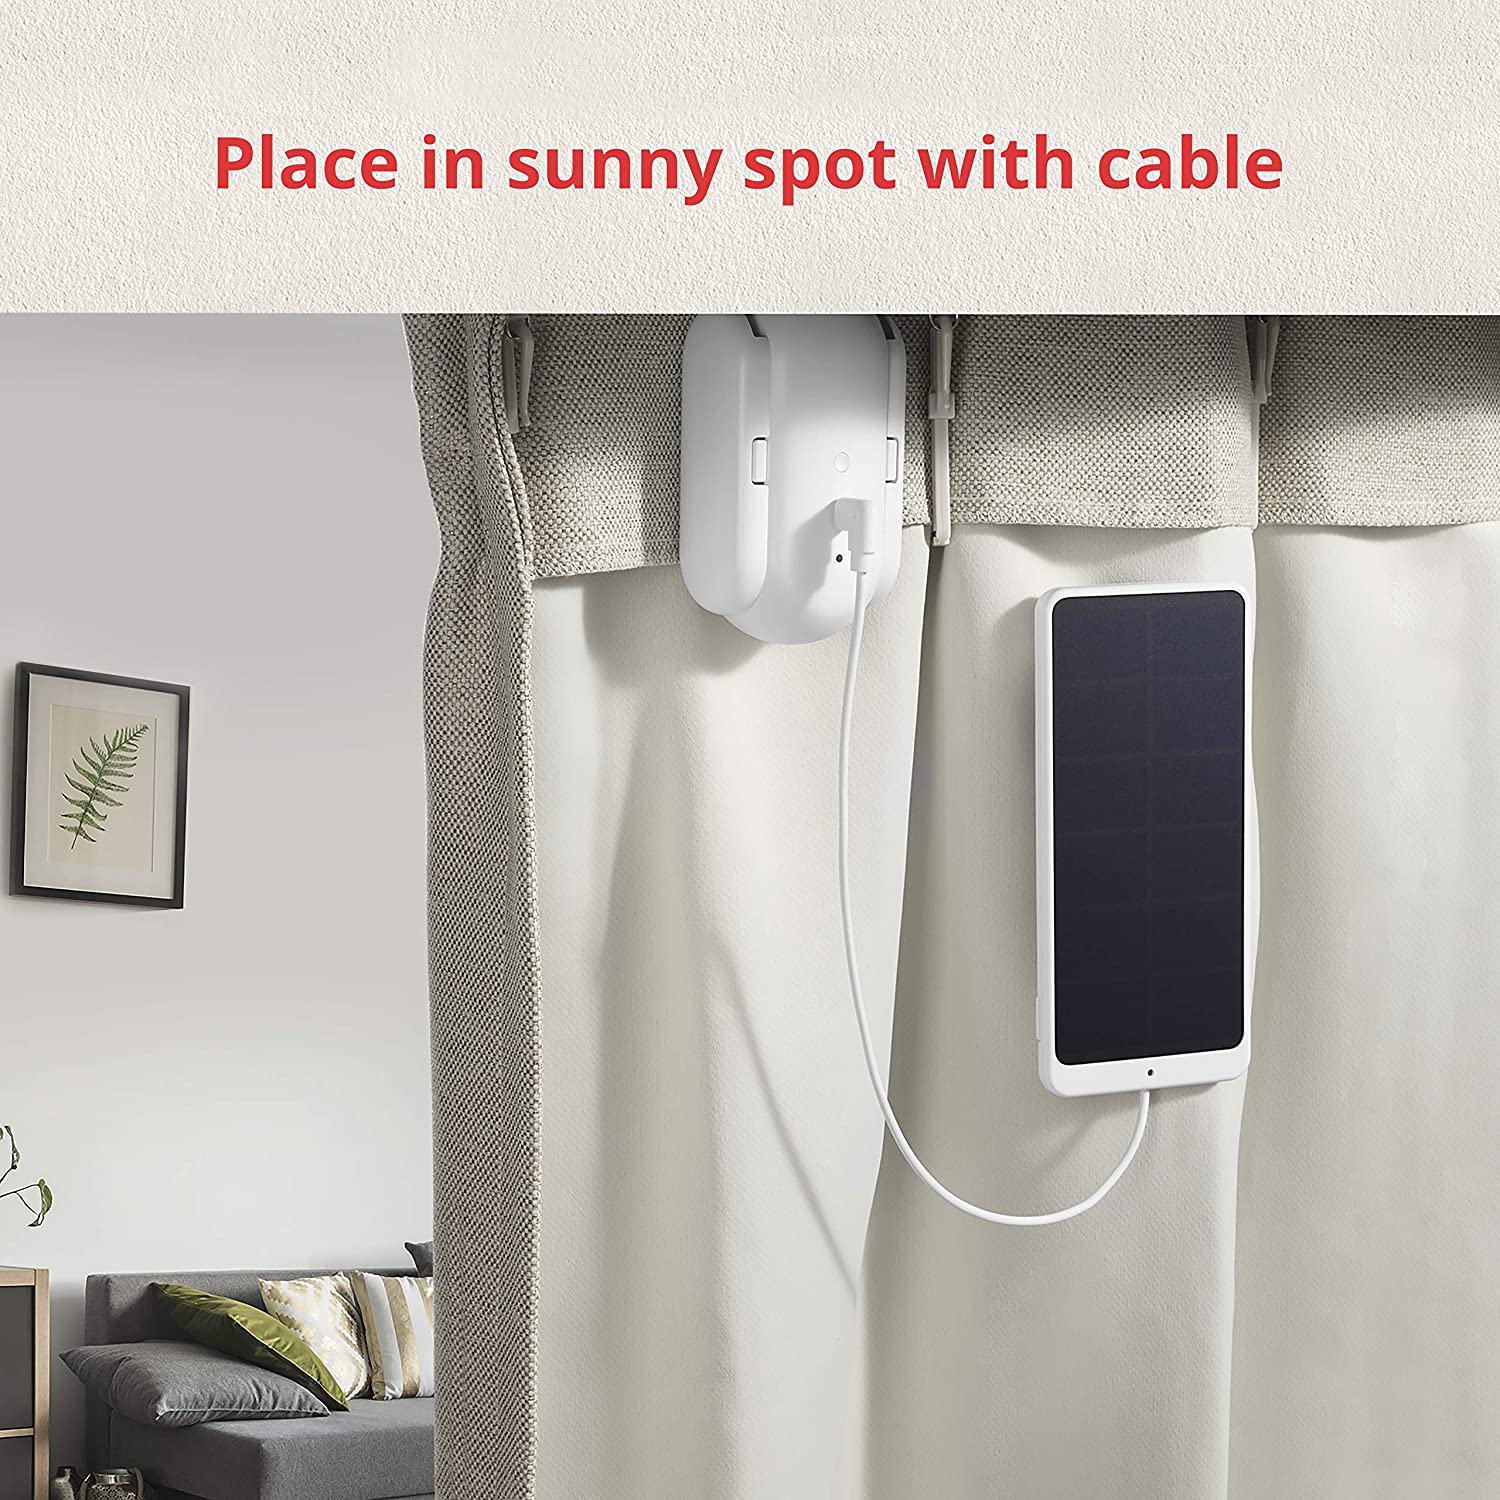 SwitchBot Solar Panel Charger for SwitchBot Curtain | Works with U/Rod/I SwitchBot Curtain Models